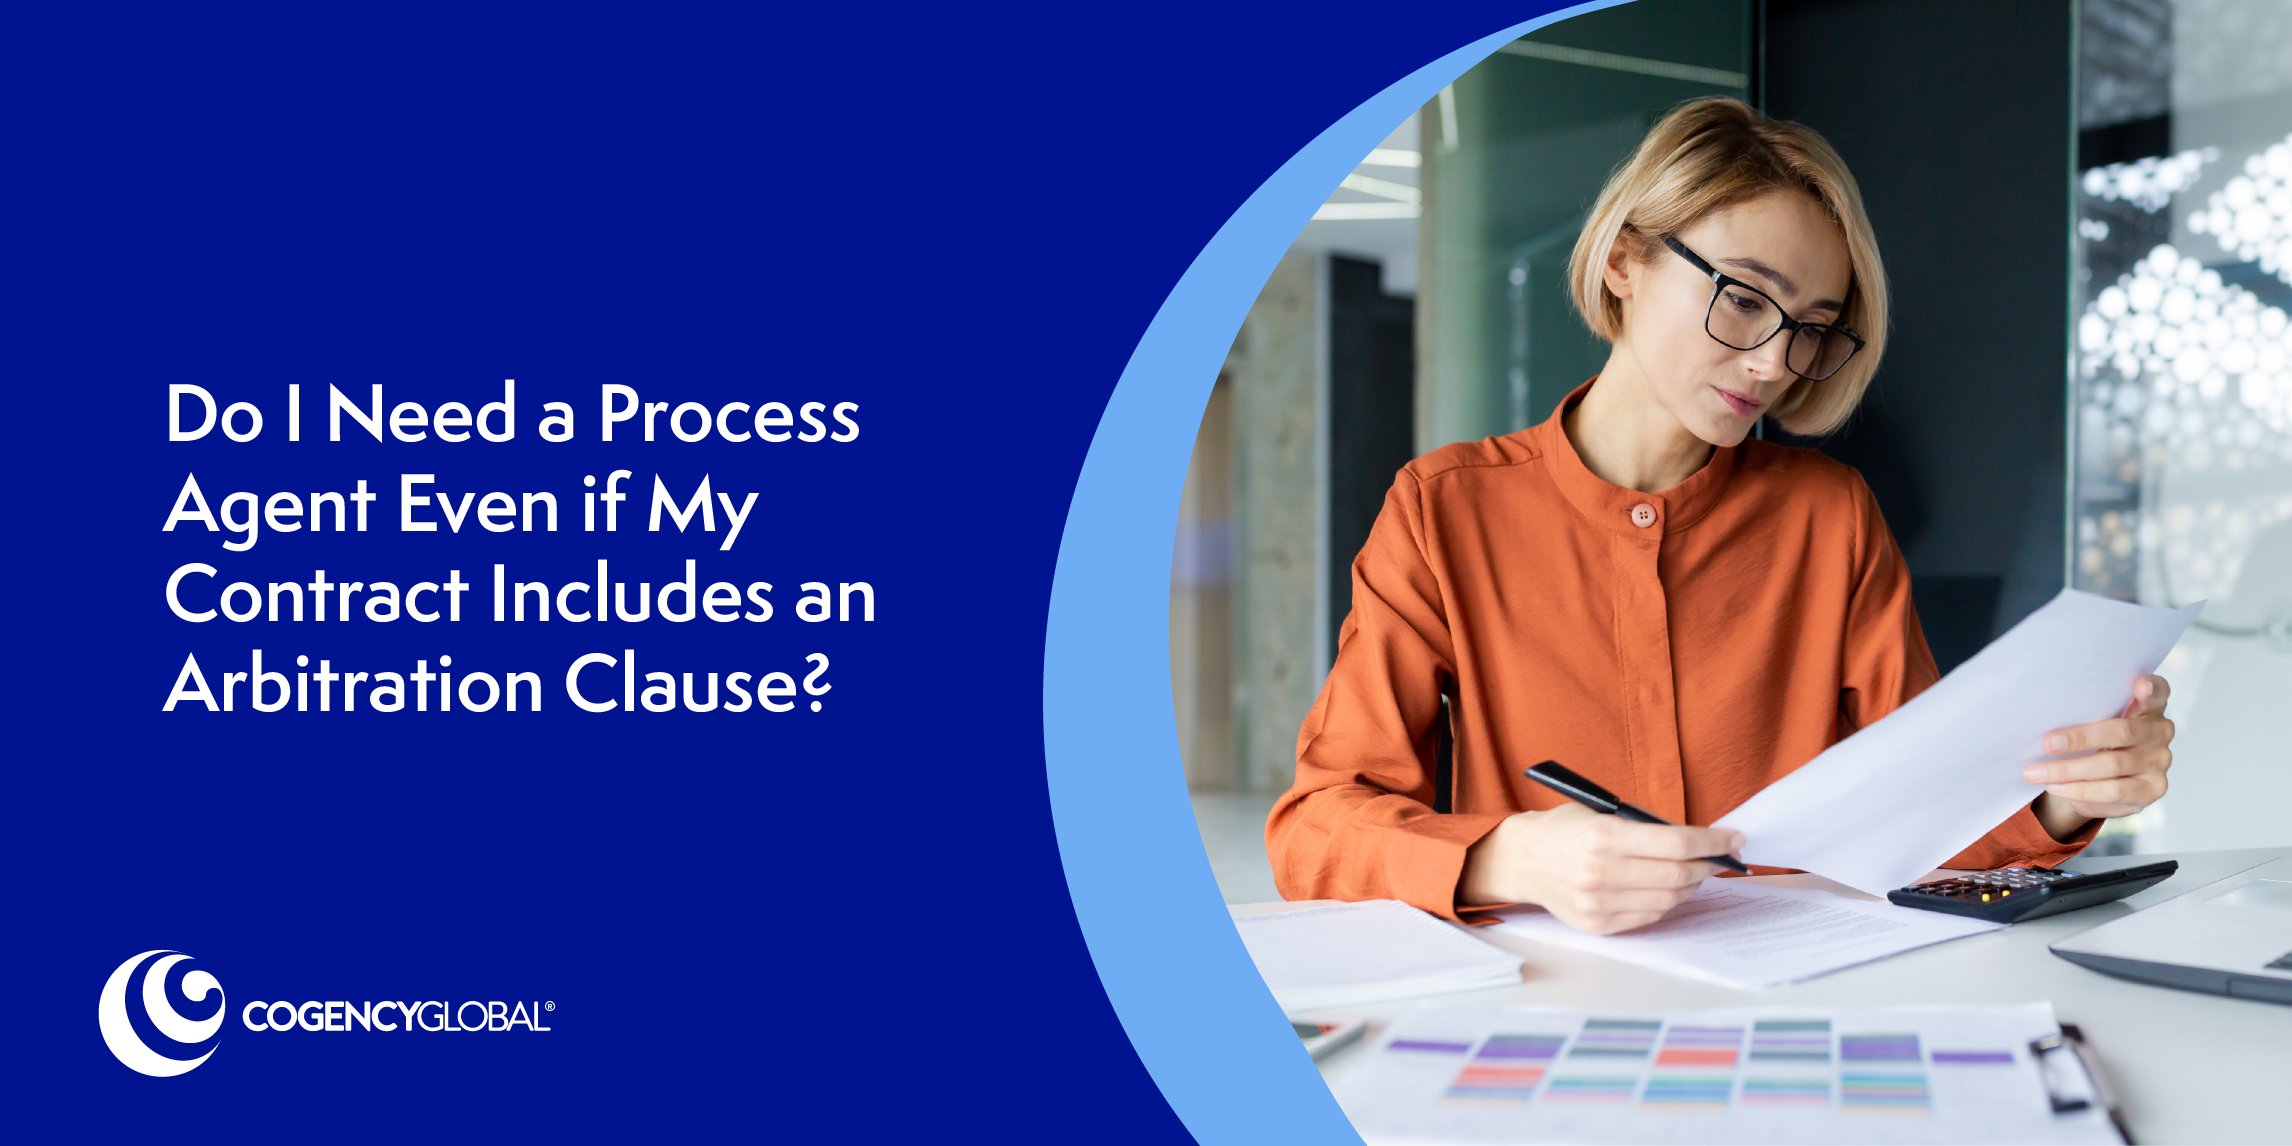 Do I Need a Process Agent Even If My Contract Includes an Arbitration Clause?